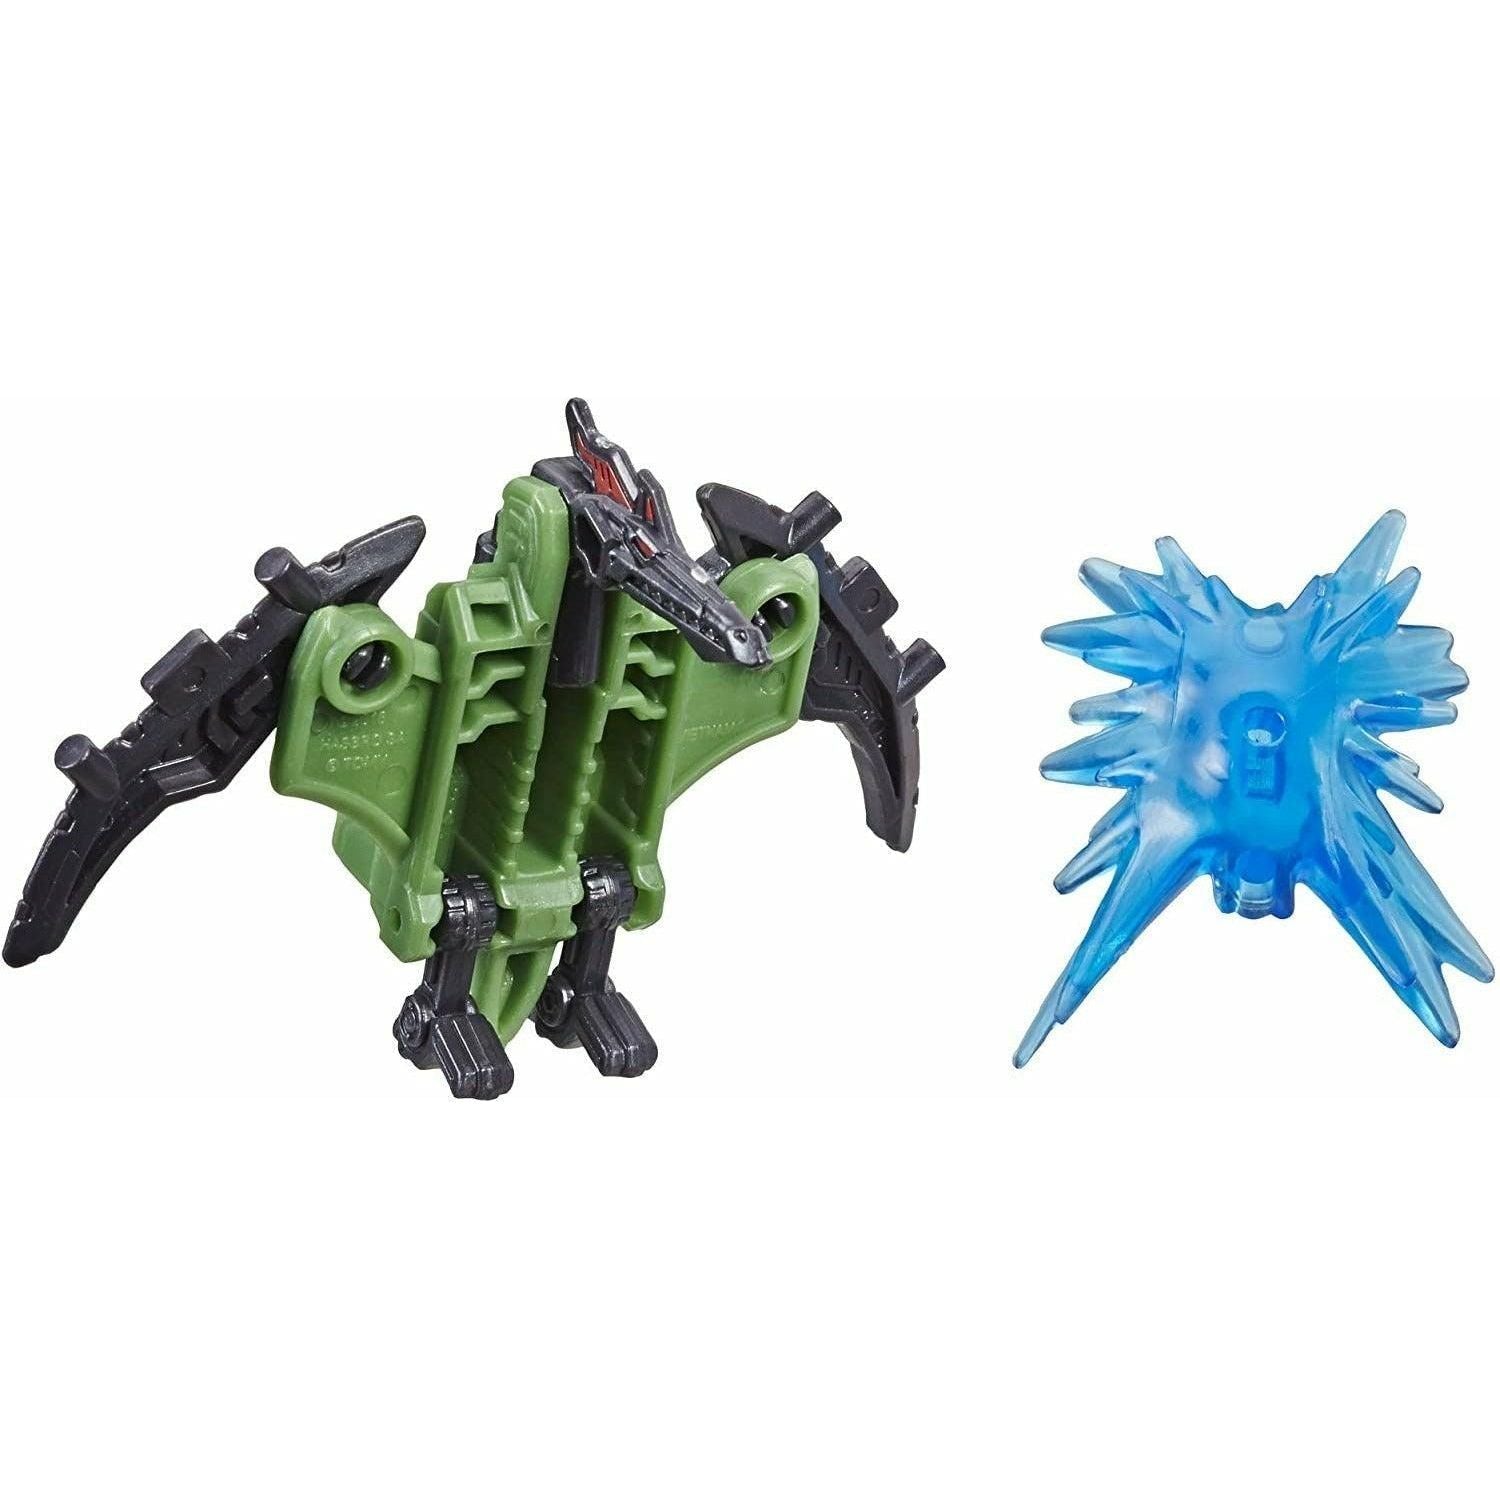 Transformers Toy Generations War for Cybertron: Siege Battle Masters Wfc-S16 Pteraxadon Action Figure - BumbleToys - 8+ Years, Boys, Figures, OXE, Transformers